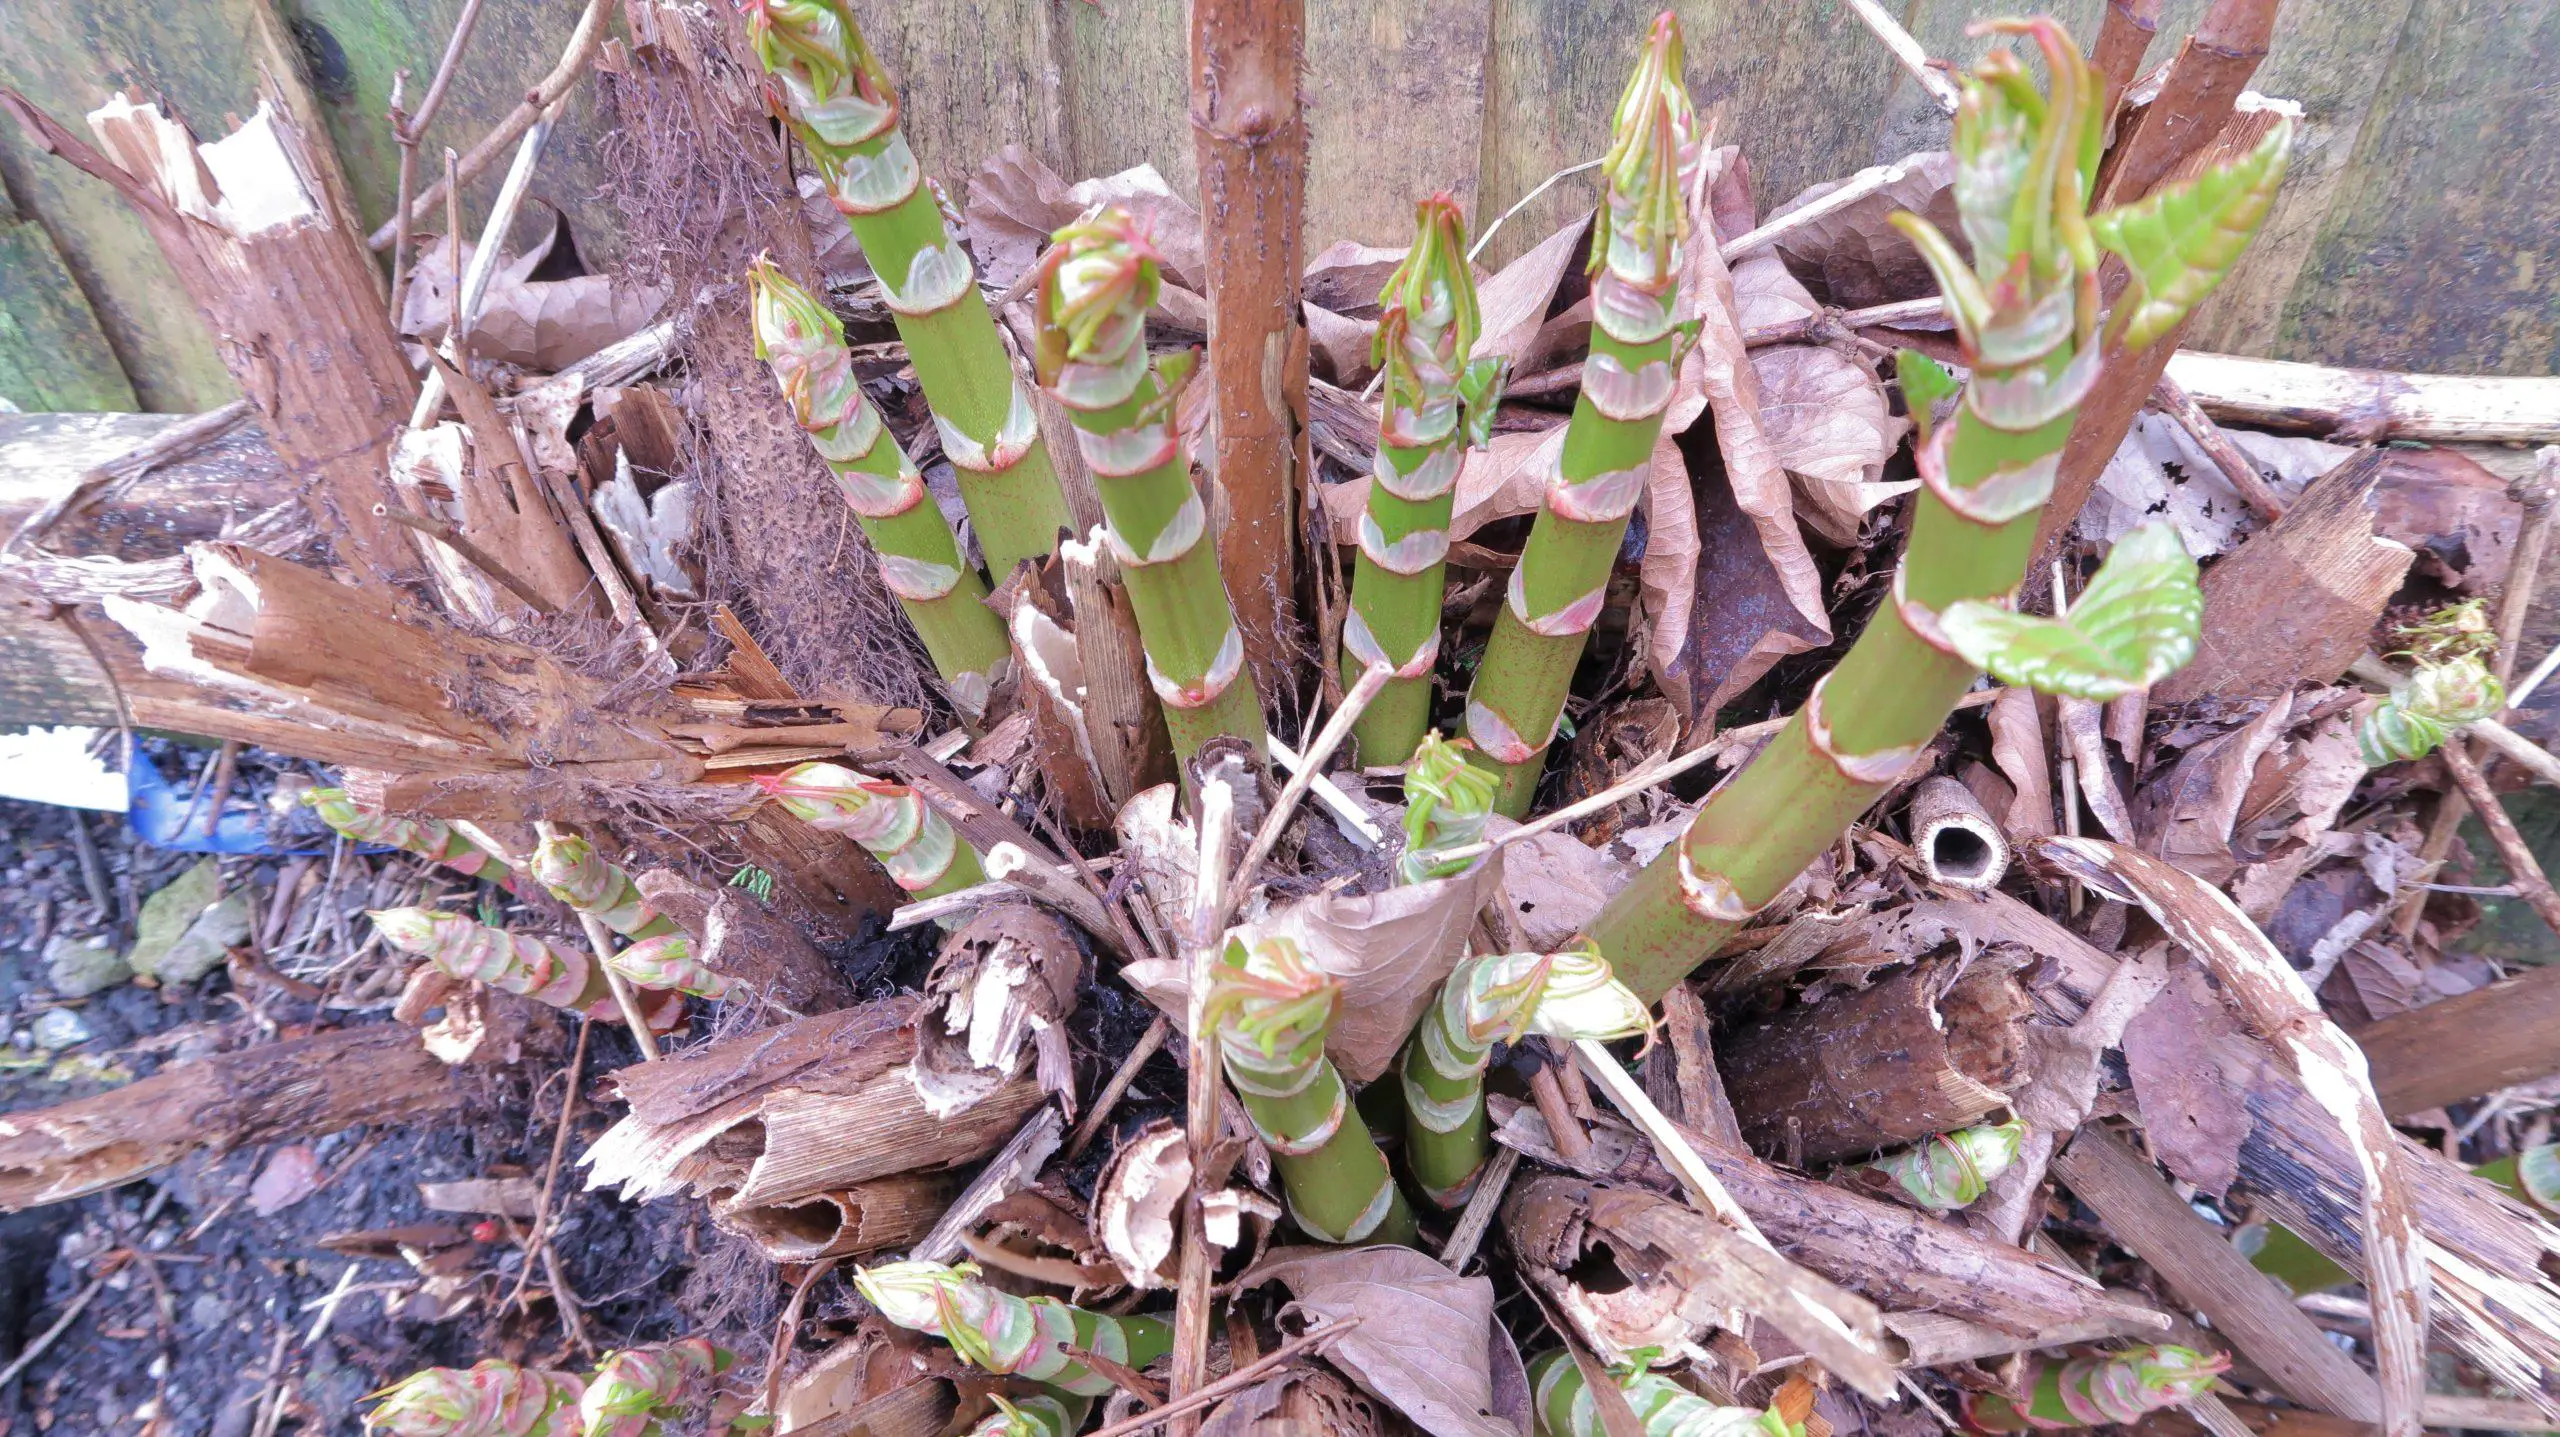 Japanese knotweed grows year on year on the same crown and robs the local soil of nutrients